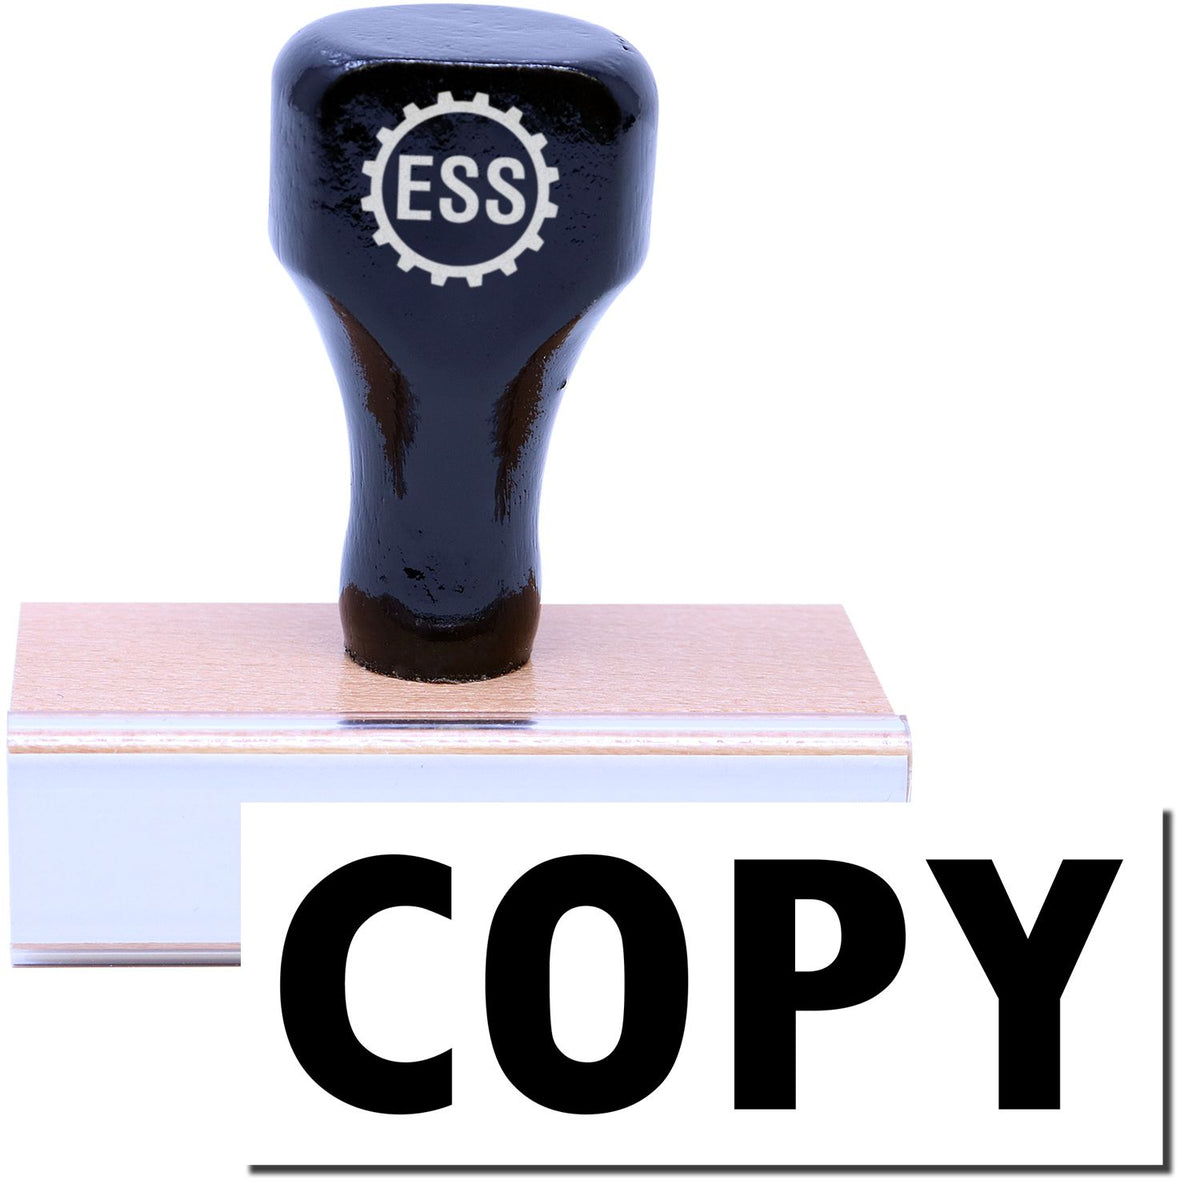 A stock office rubber stamp with a stamped image showing how the text &quot;COPY&quot; is displayed after stamping.